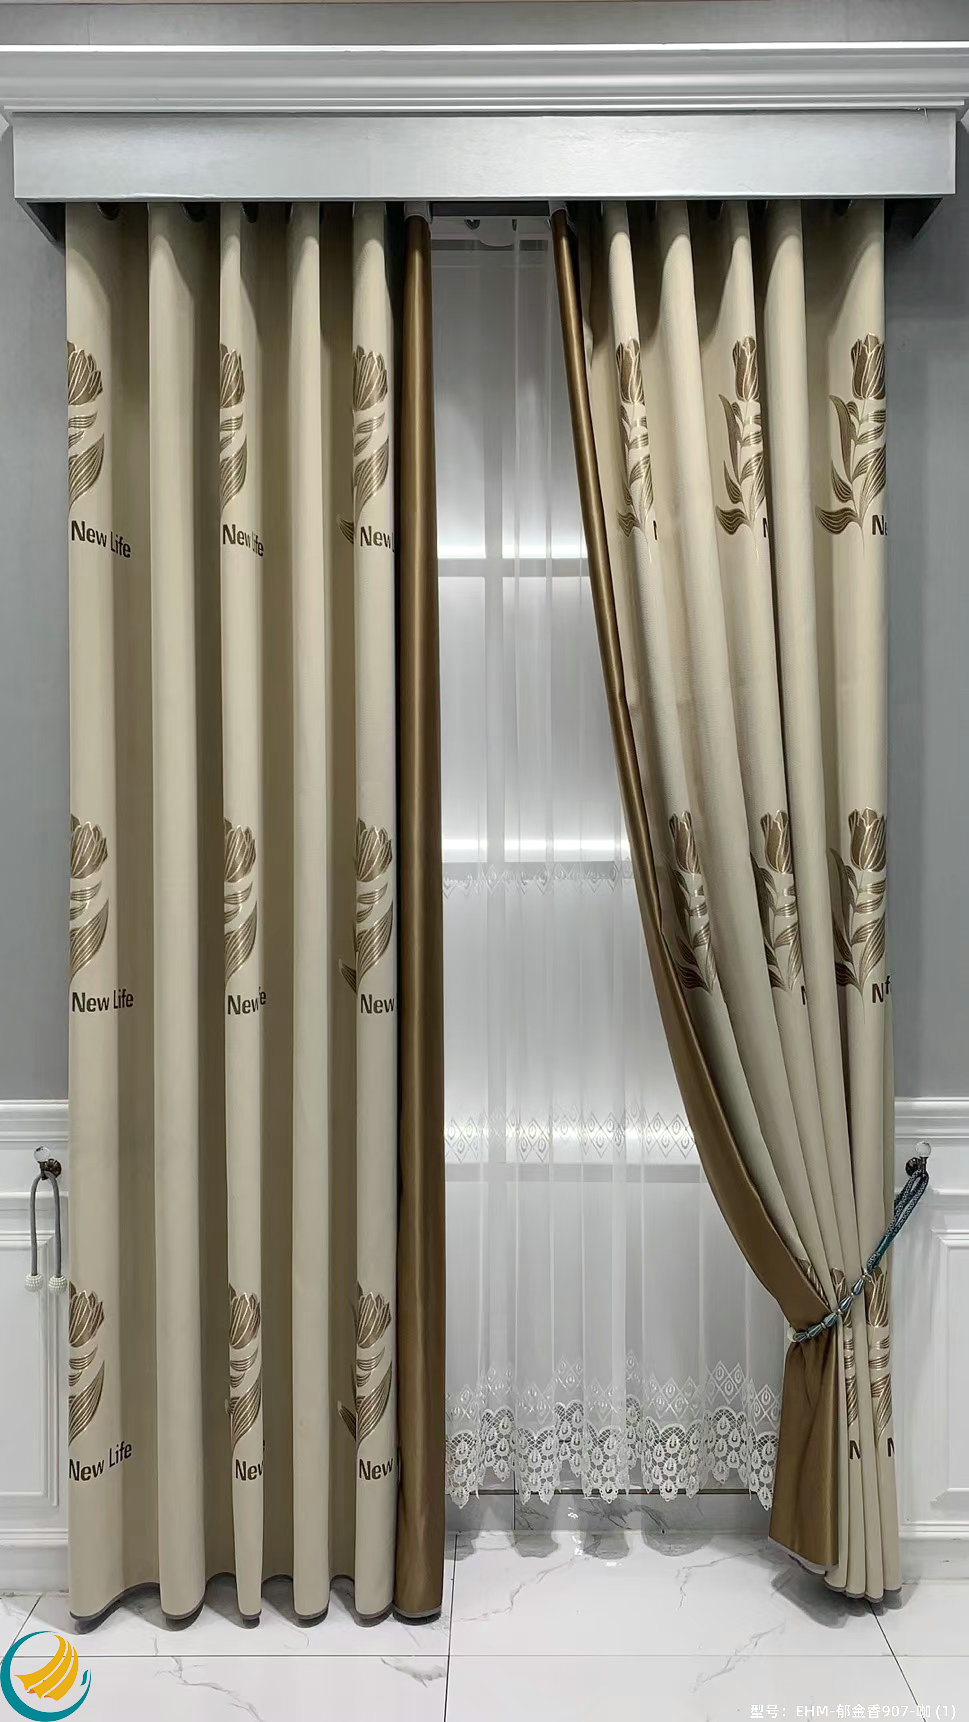 Yichuang Curtain Textile Thickened Fine Cashmere Jacquard Black Silk Shading Home Decoration Fate Tree Welcome Pine Tulip Middle Curtain